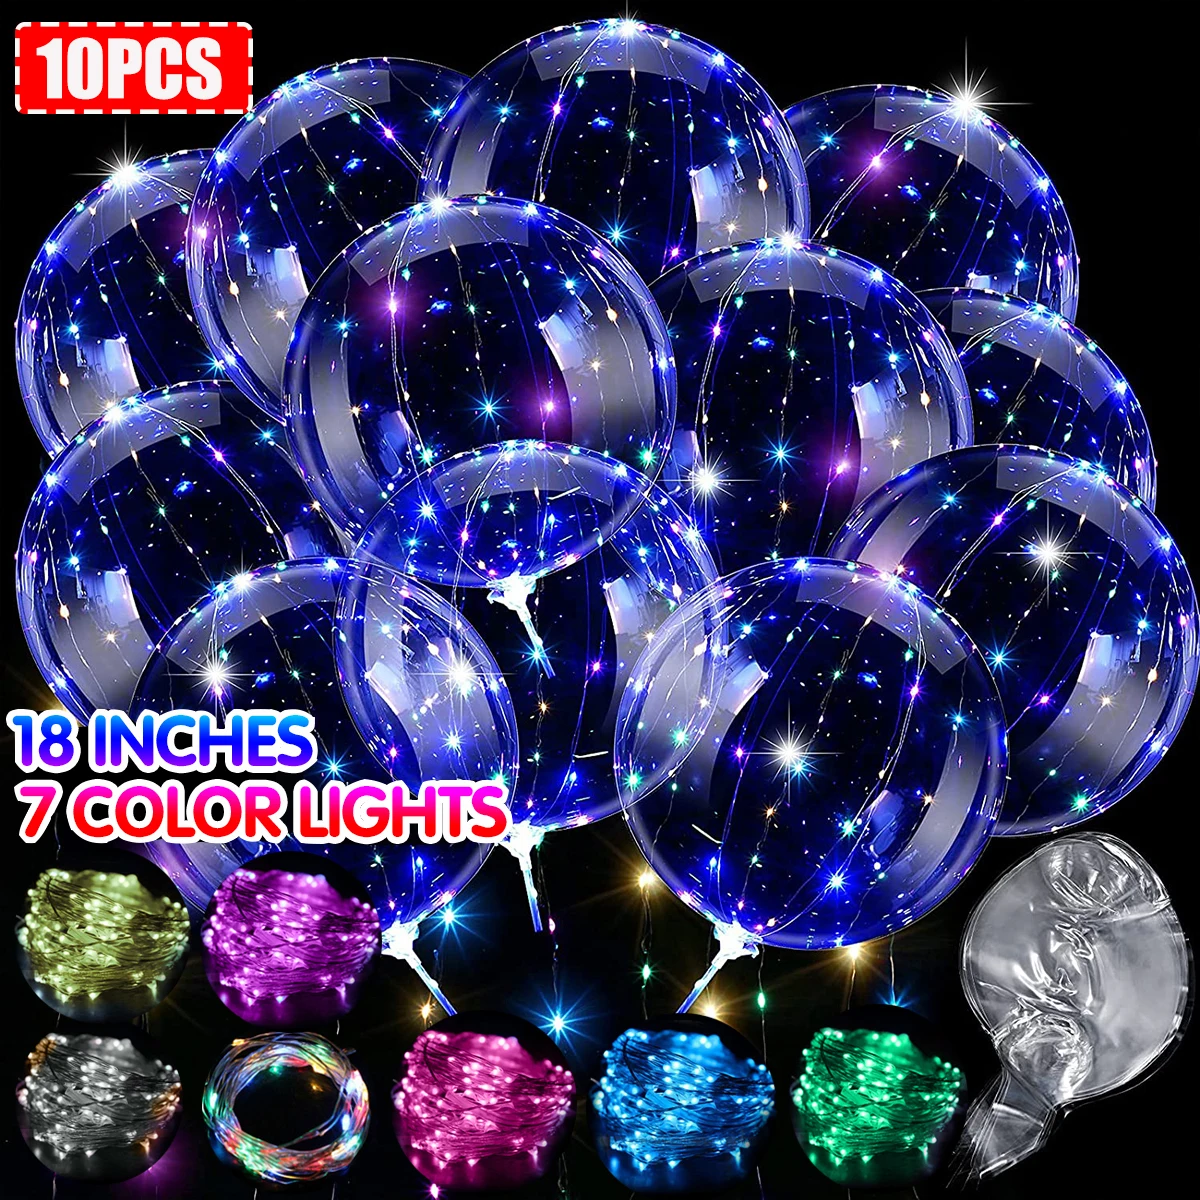 10Pcs Clear Led Balloons Light Up Colorful Bobo Balloons Transparent Light Bubble for Weddings Banquets Parties Birthday Decor